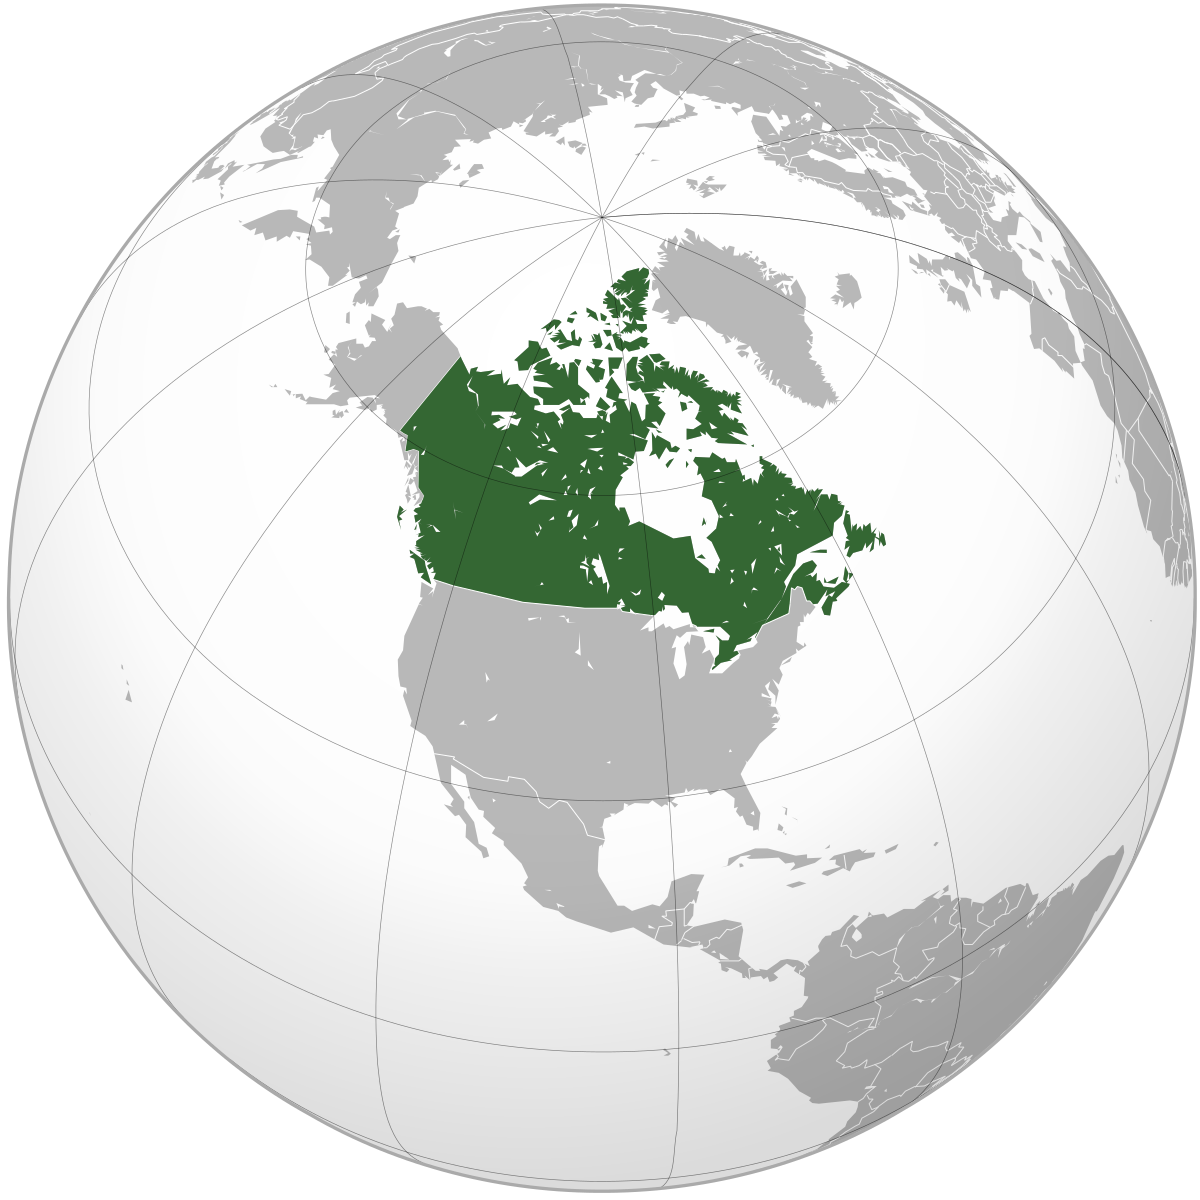 LGBT rights in Canada - Wikipedia